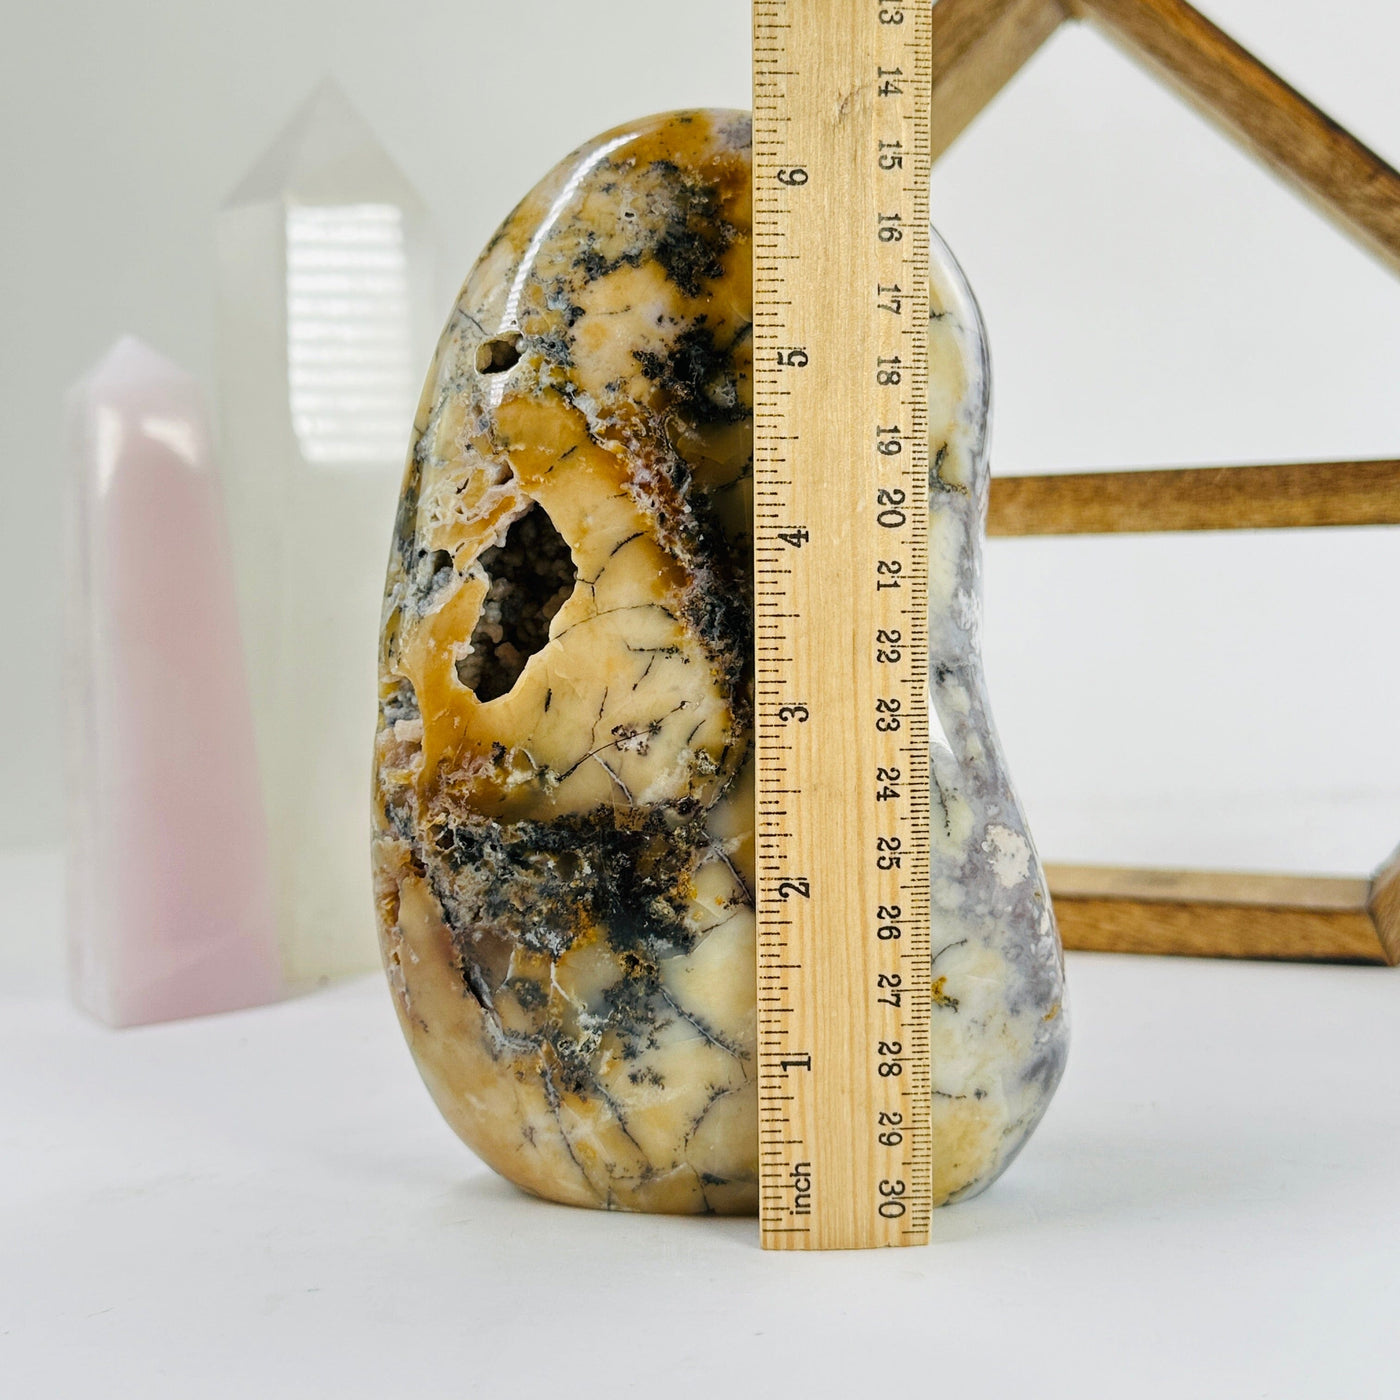 dendrite opal next to a ruler for size reference